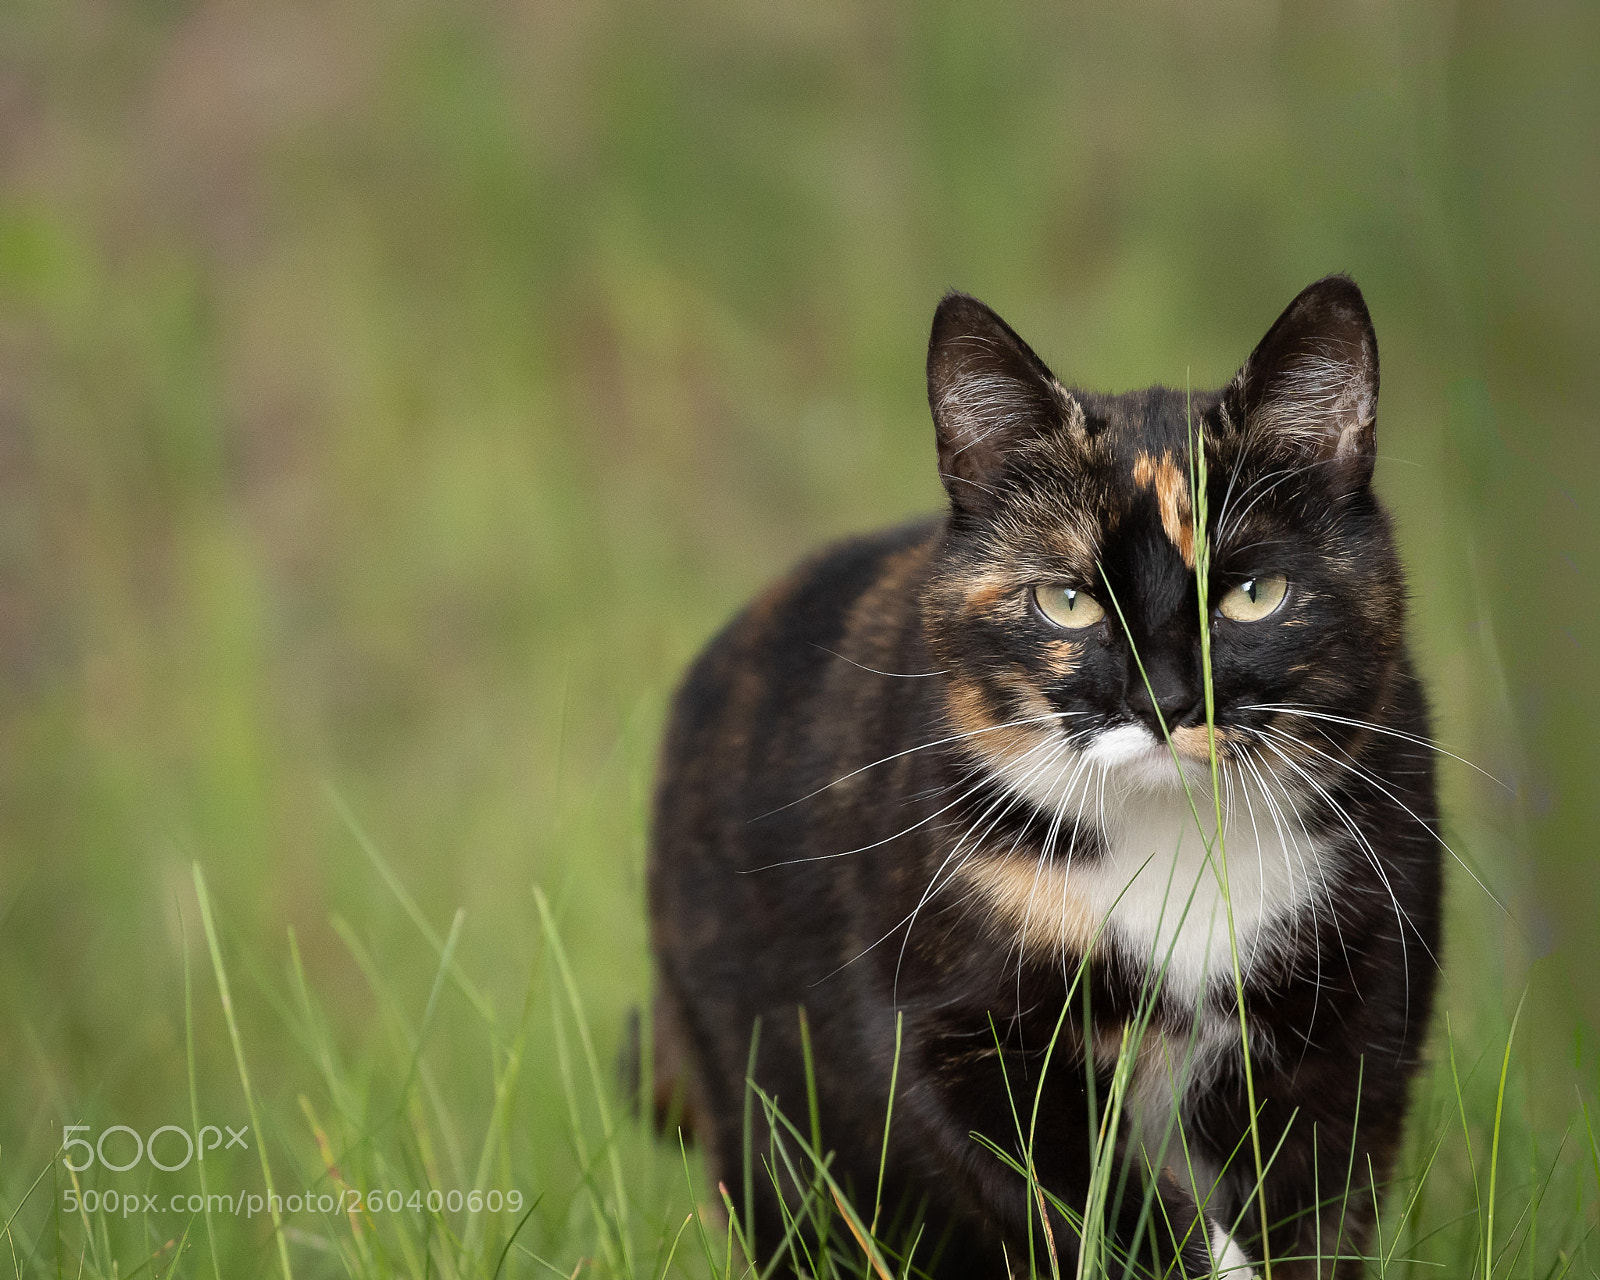 Sony a7 III sample photo. Cat in grass photography